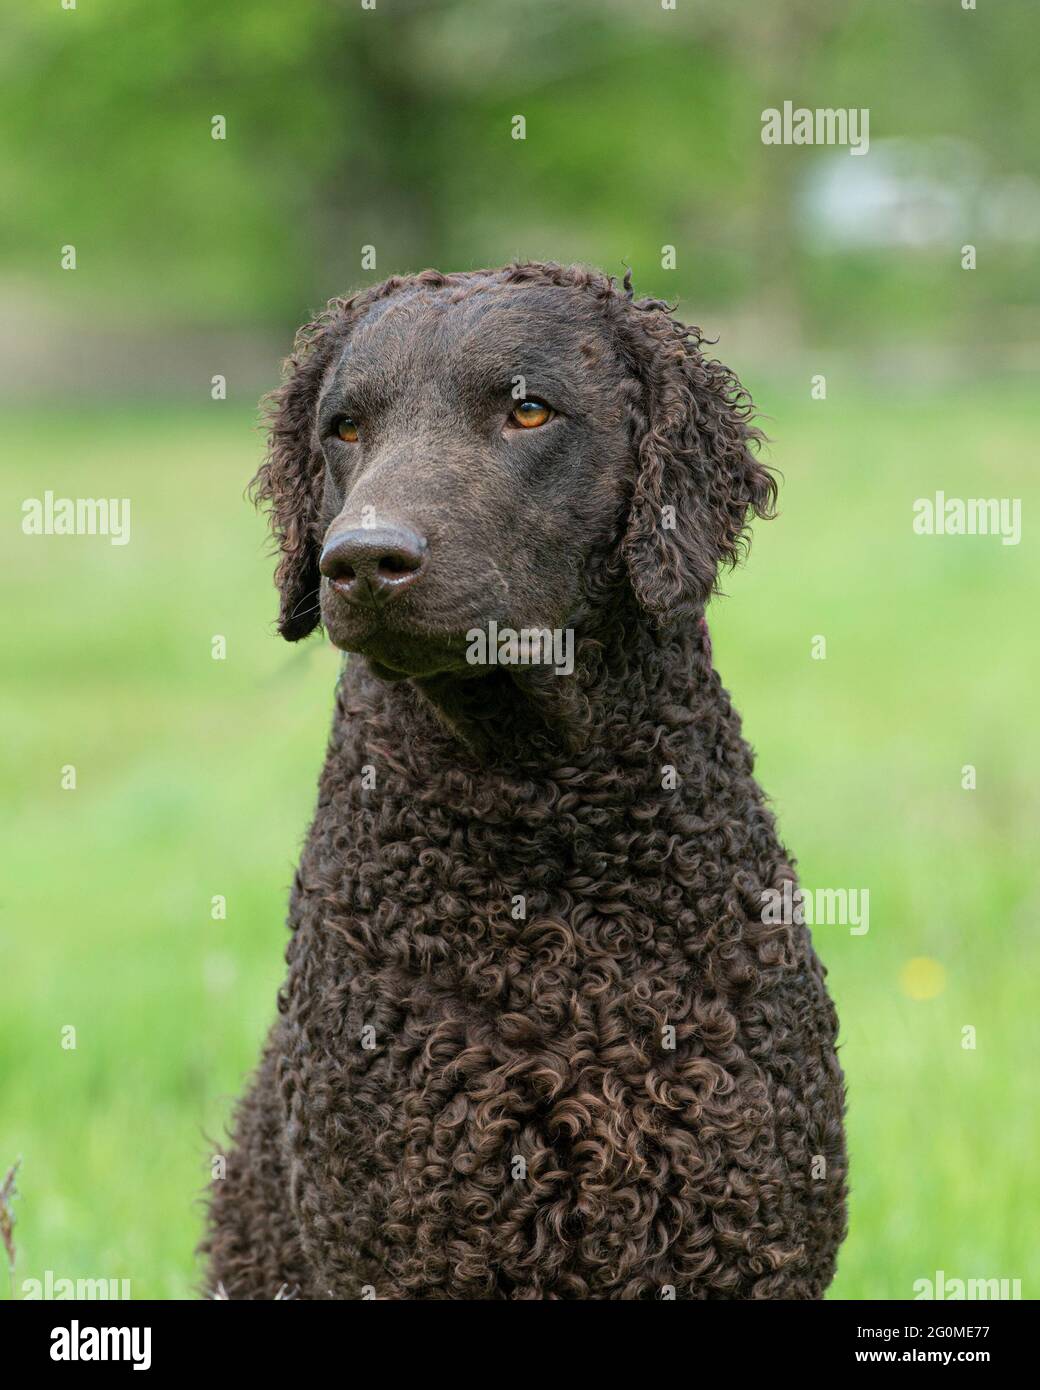 Curly Coated Retriever dog Banque D'Images